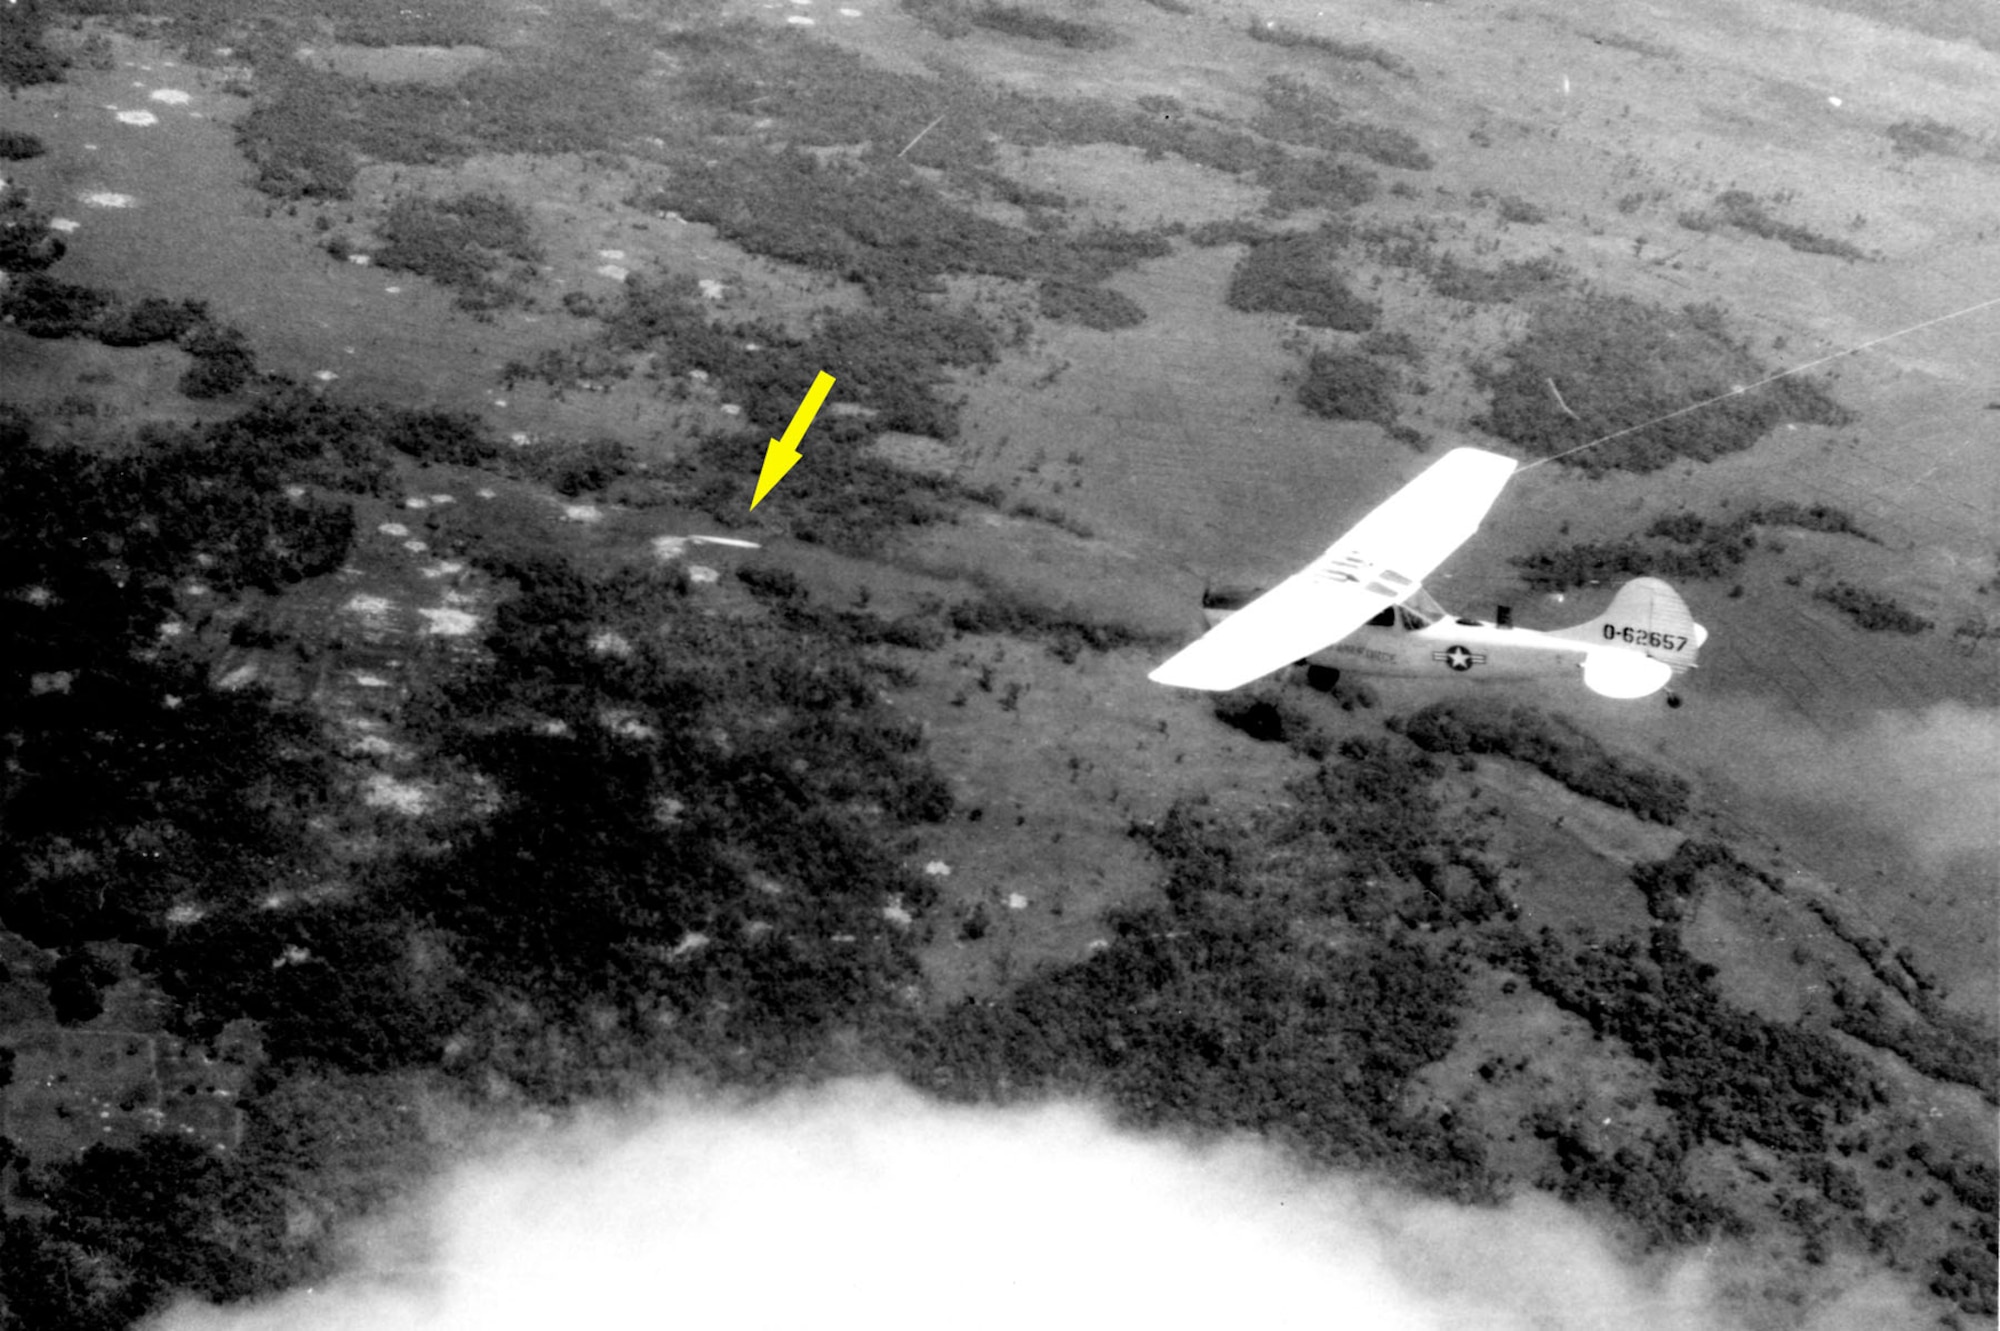 An O-1F pilot of the Red Marker FACs at Tan Son Nhut AB fires a marking rocket at an enemy site near Tay Ninh City. The Red Markers, officially known as Advisory Team 162, provided FAC support for the ARVN Airborne Division. (U.S. Air Force photo)